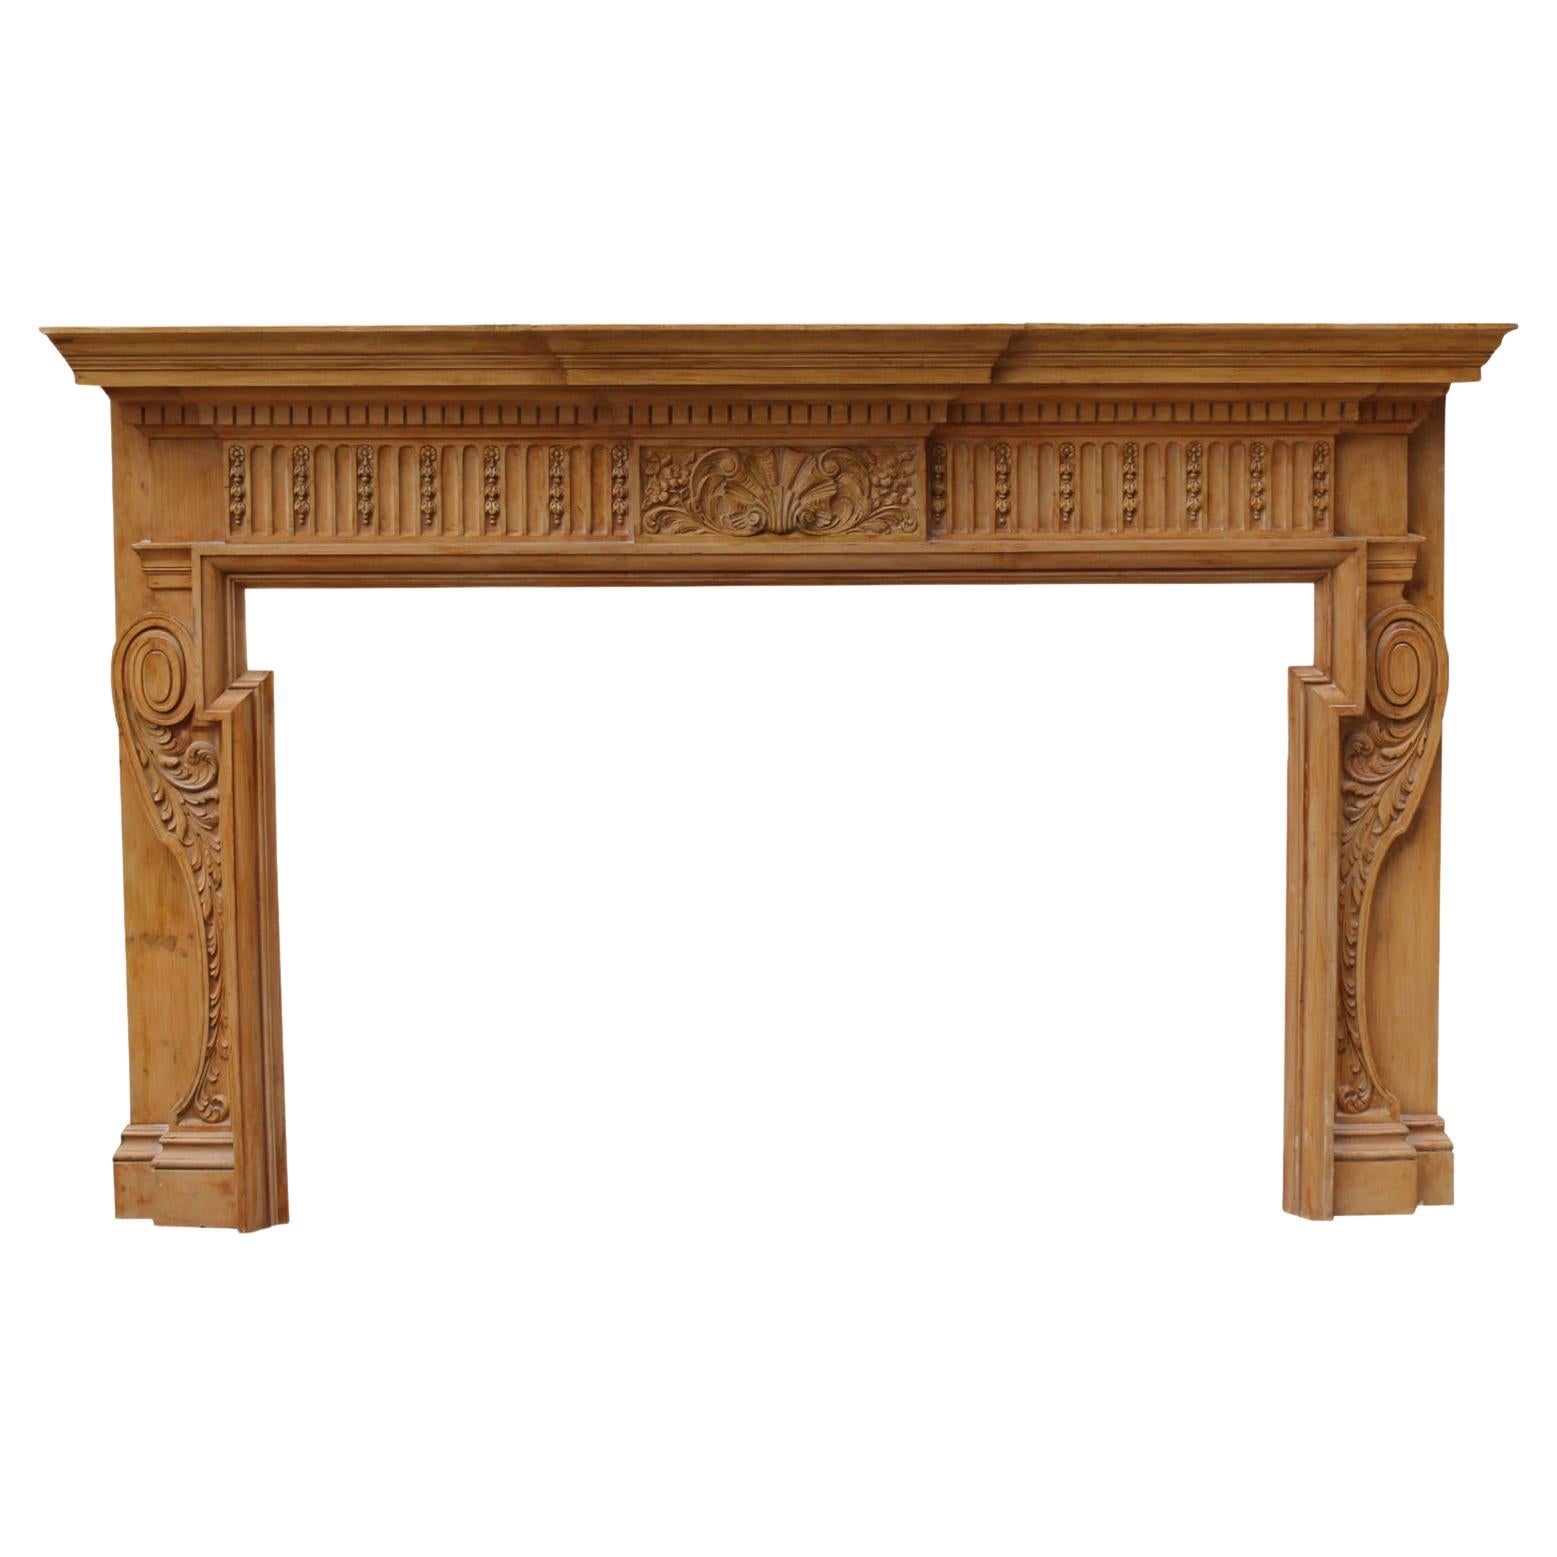 Antique Georgian Style Carved Pine Fire Surround